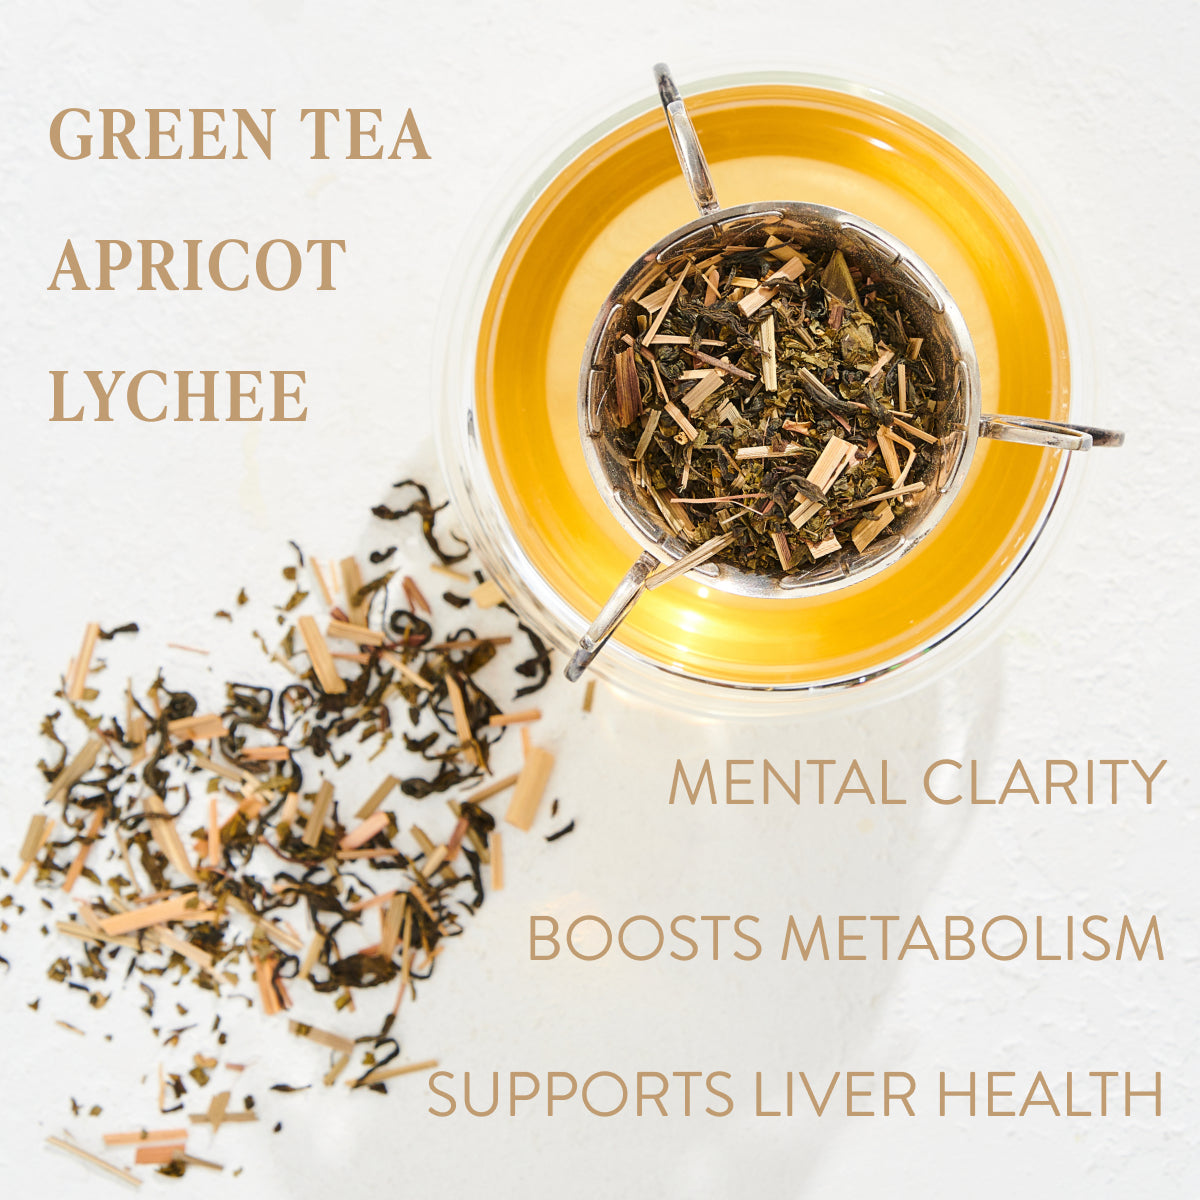 A glass teacup filled with Goddess Green Tea and apricot lychee blend. Loose leaf tea is scattered next to the cup on a white surface. Text on the image reads: &quot;GODDESS GREEN TEA APRICOT LYCHEE MENTAL CLARITY BOOSTS METABOLISM SUPPORTS LIVER HEALTH.&quot; Experience the Magic Hour with organic tea blends.